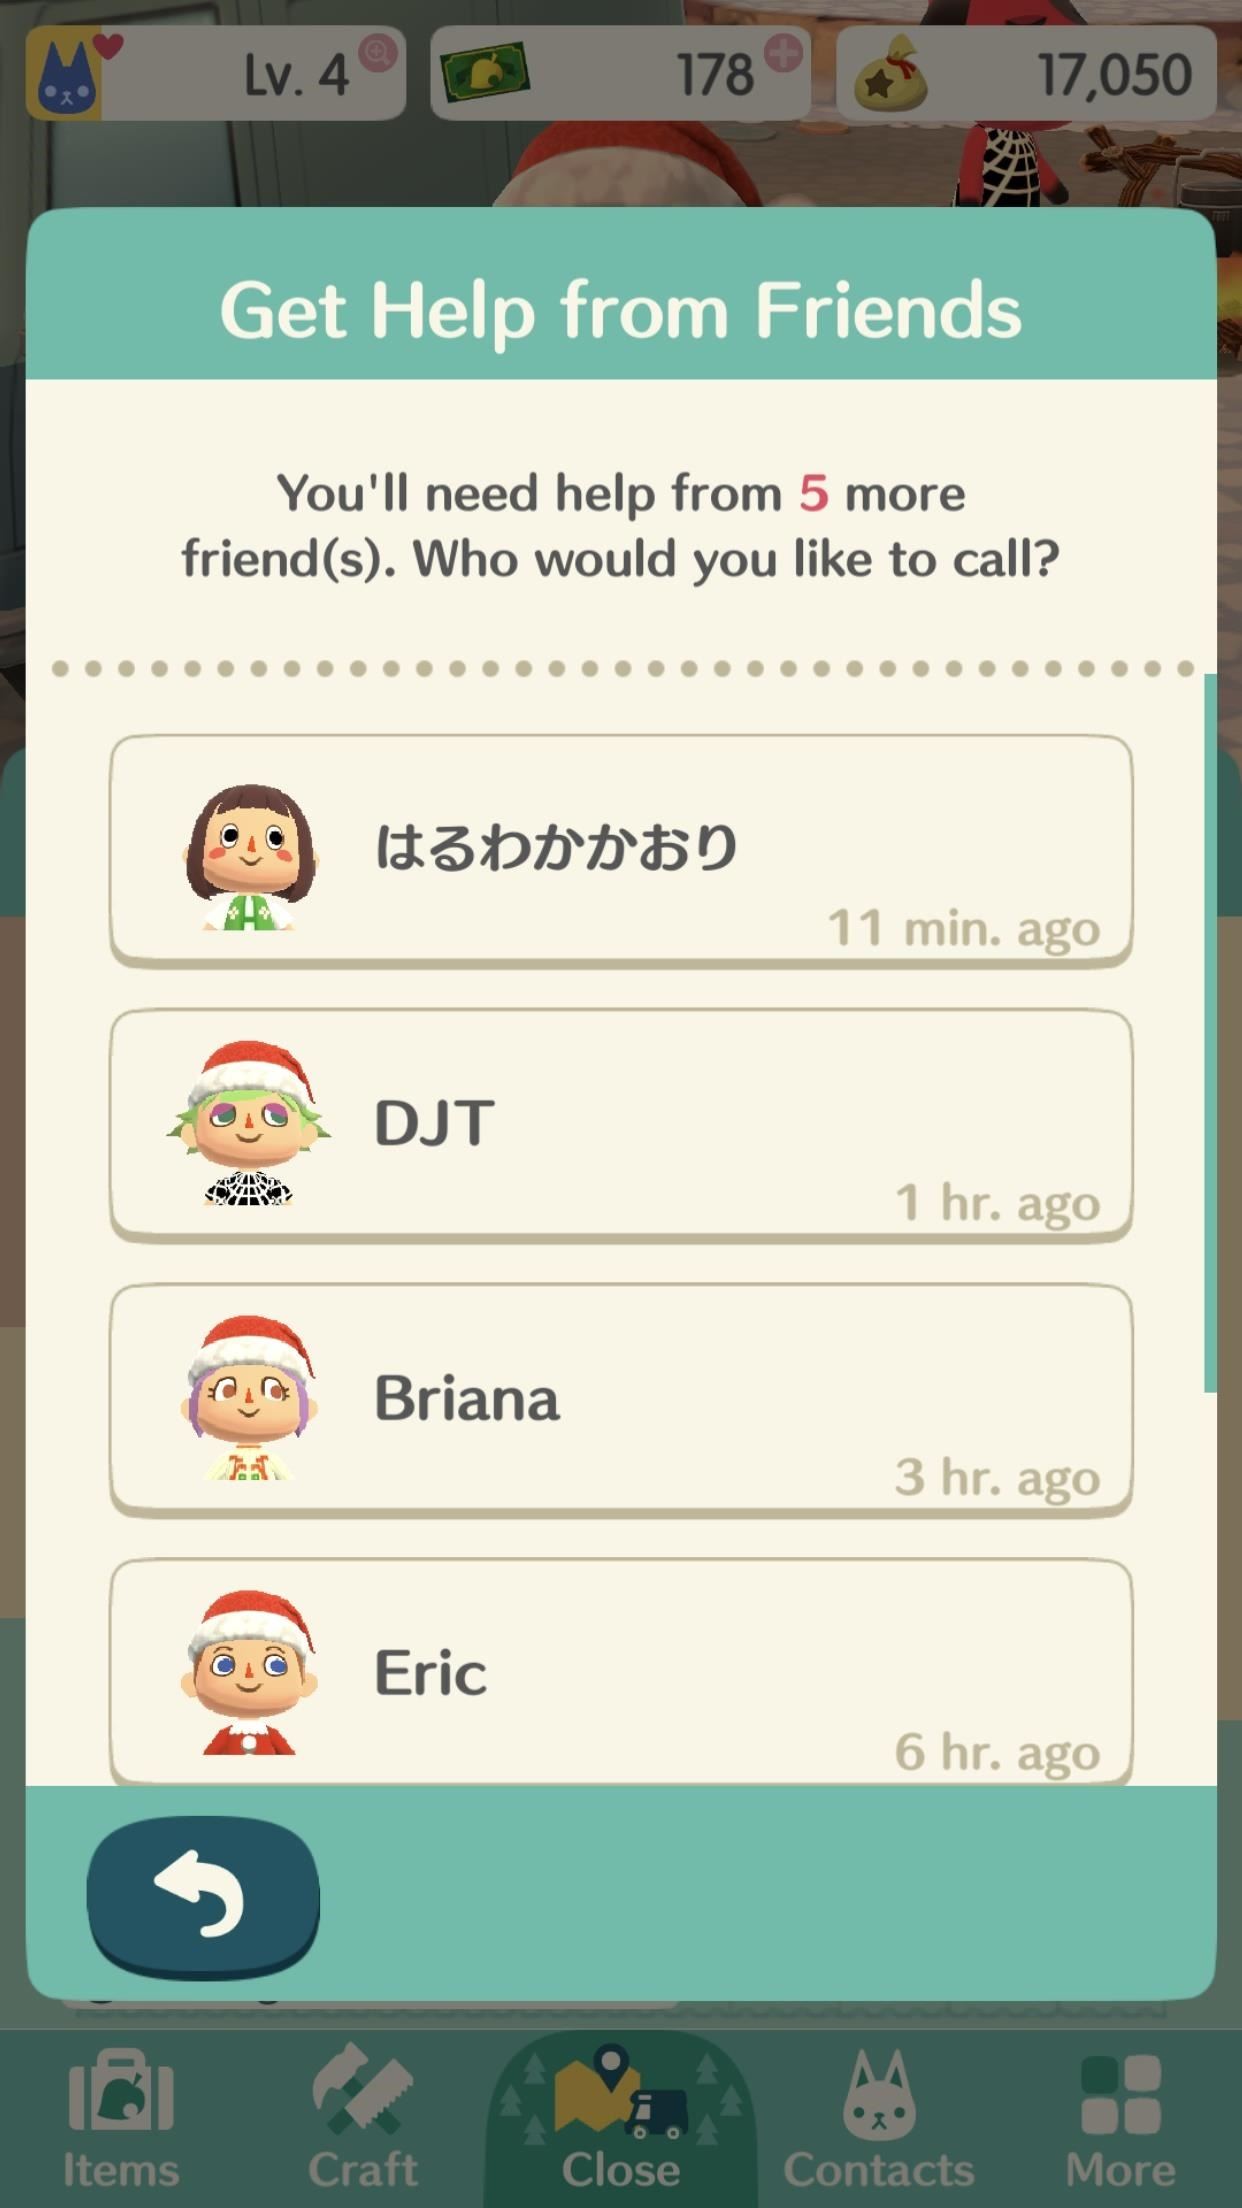 Pocket Camp 101: Making the Most of Other Players in Animal Crossing